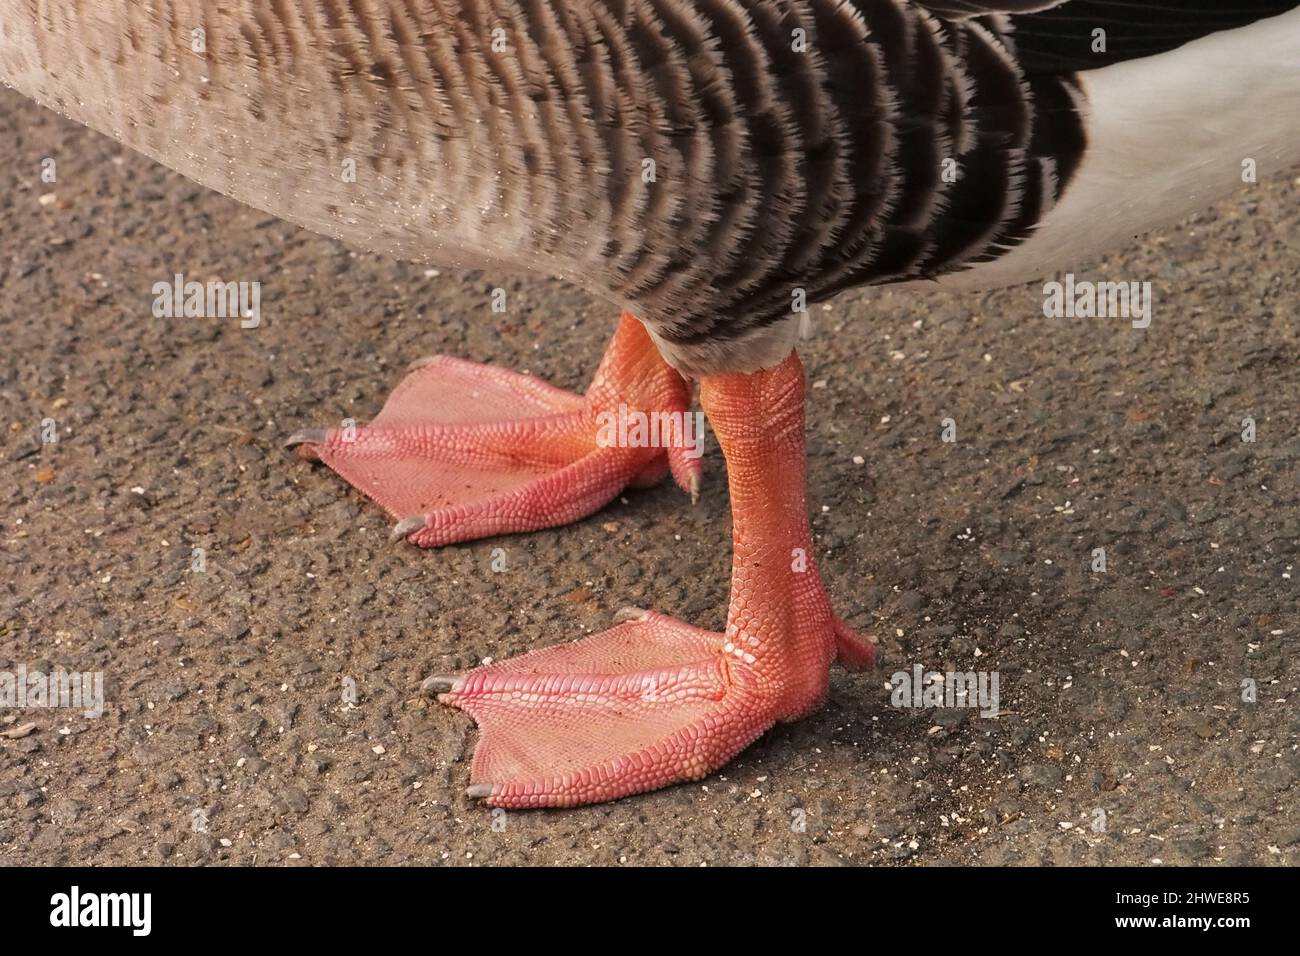 A close of the pink, webbed feet of a Greylag goose on a stoney path Stock Photo